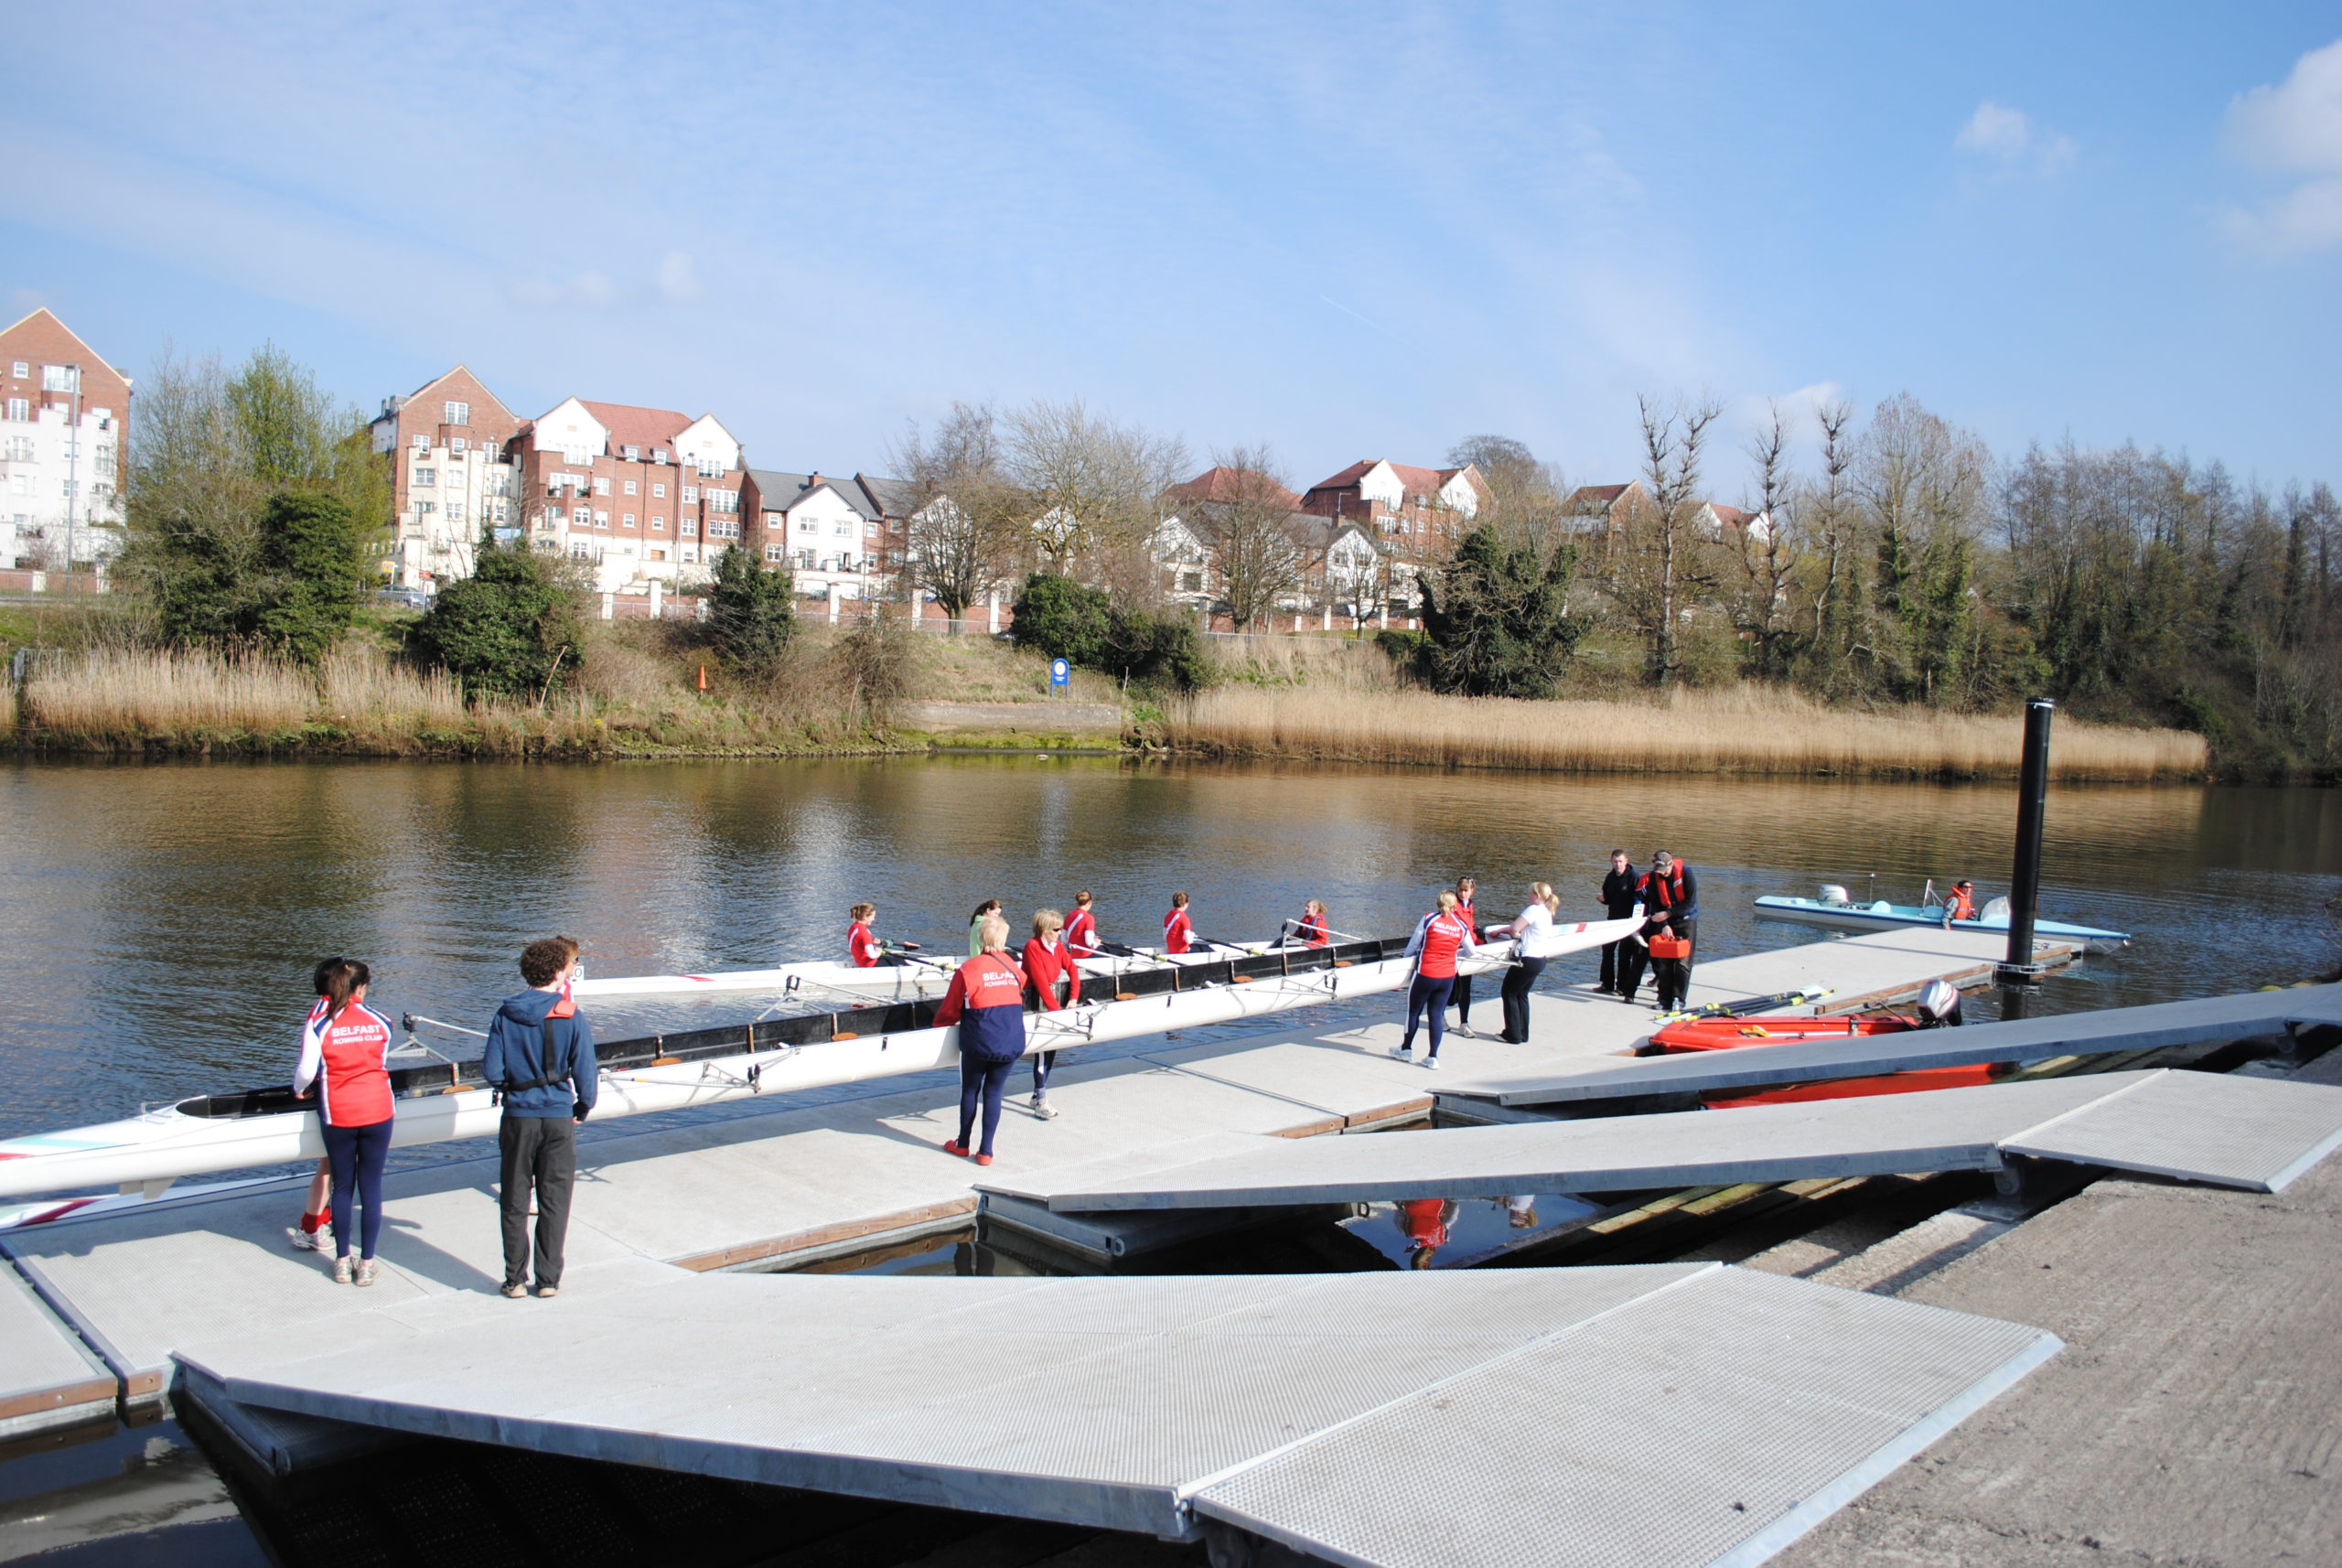 Rowers launching boats from specialist rowing pontoon